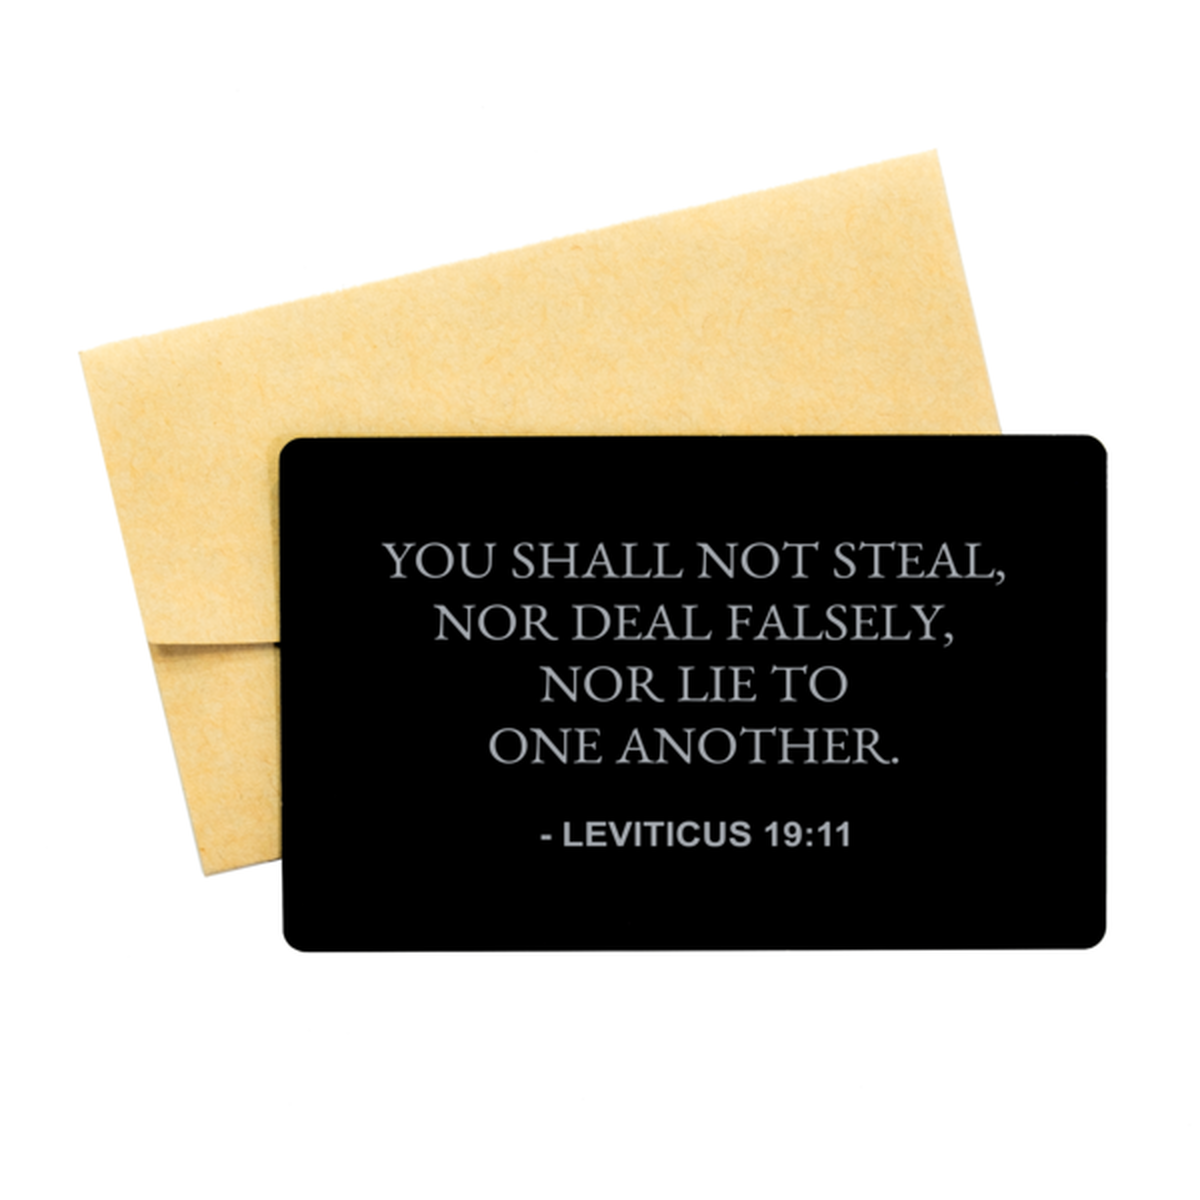 Bible Verse Card, Leviticus 19:11 You Shall Not Steal, Nor Deal Falsely, Christian Inspirational Wallet Insert Gifts For Men Women